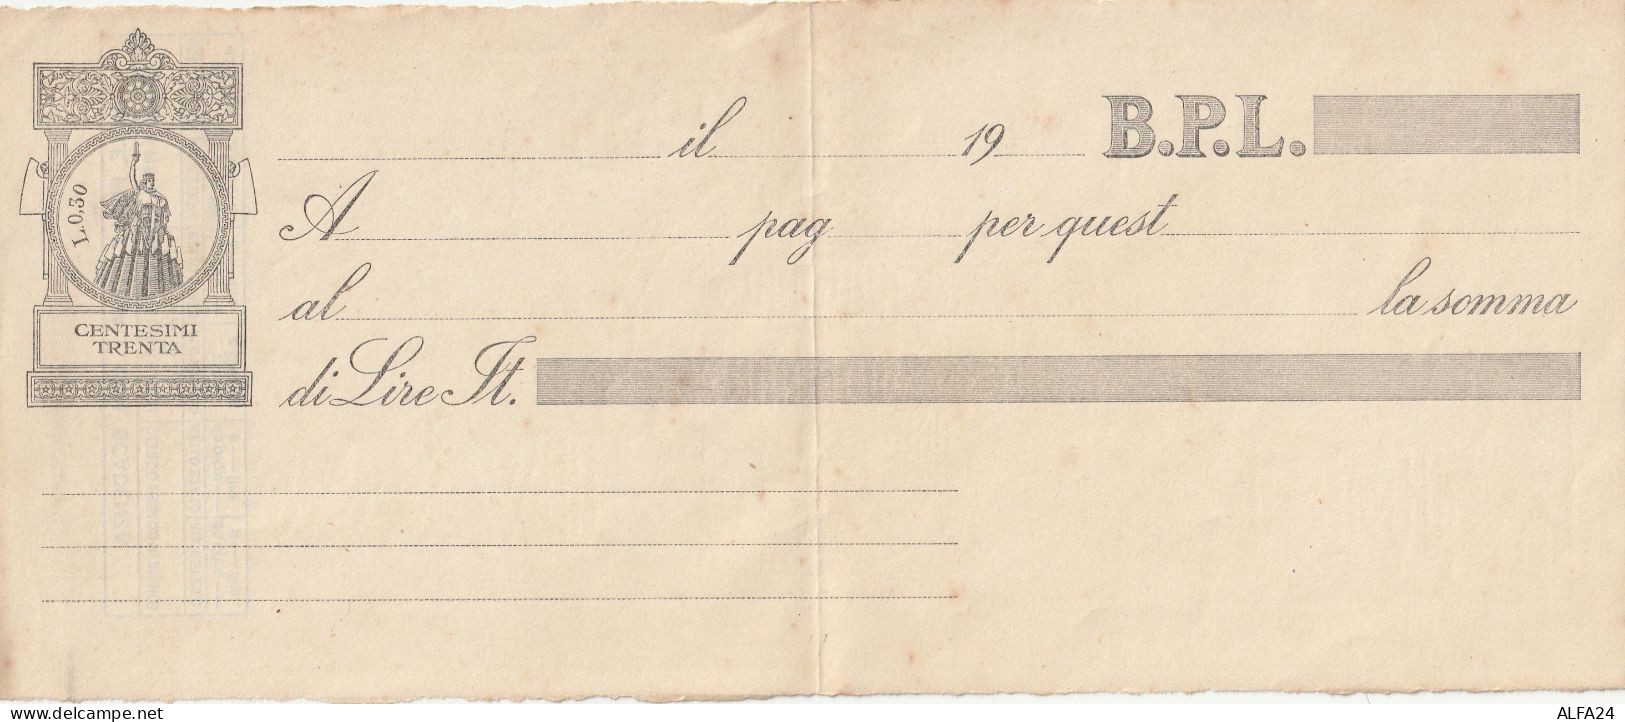 ASSEGNO BPL CENT.30 (RY7336 - [10] Cheques Y Mini-cheques